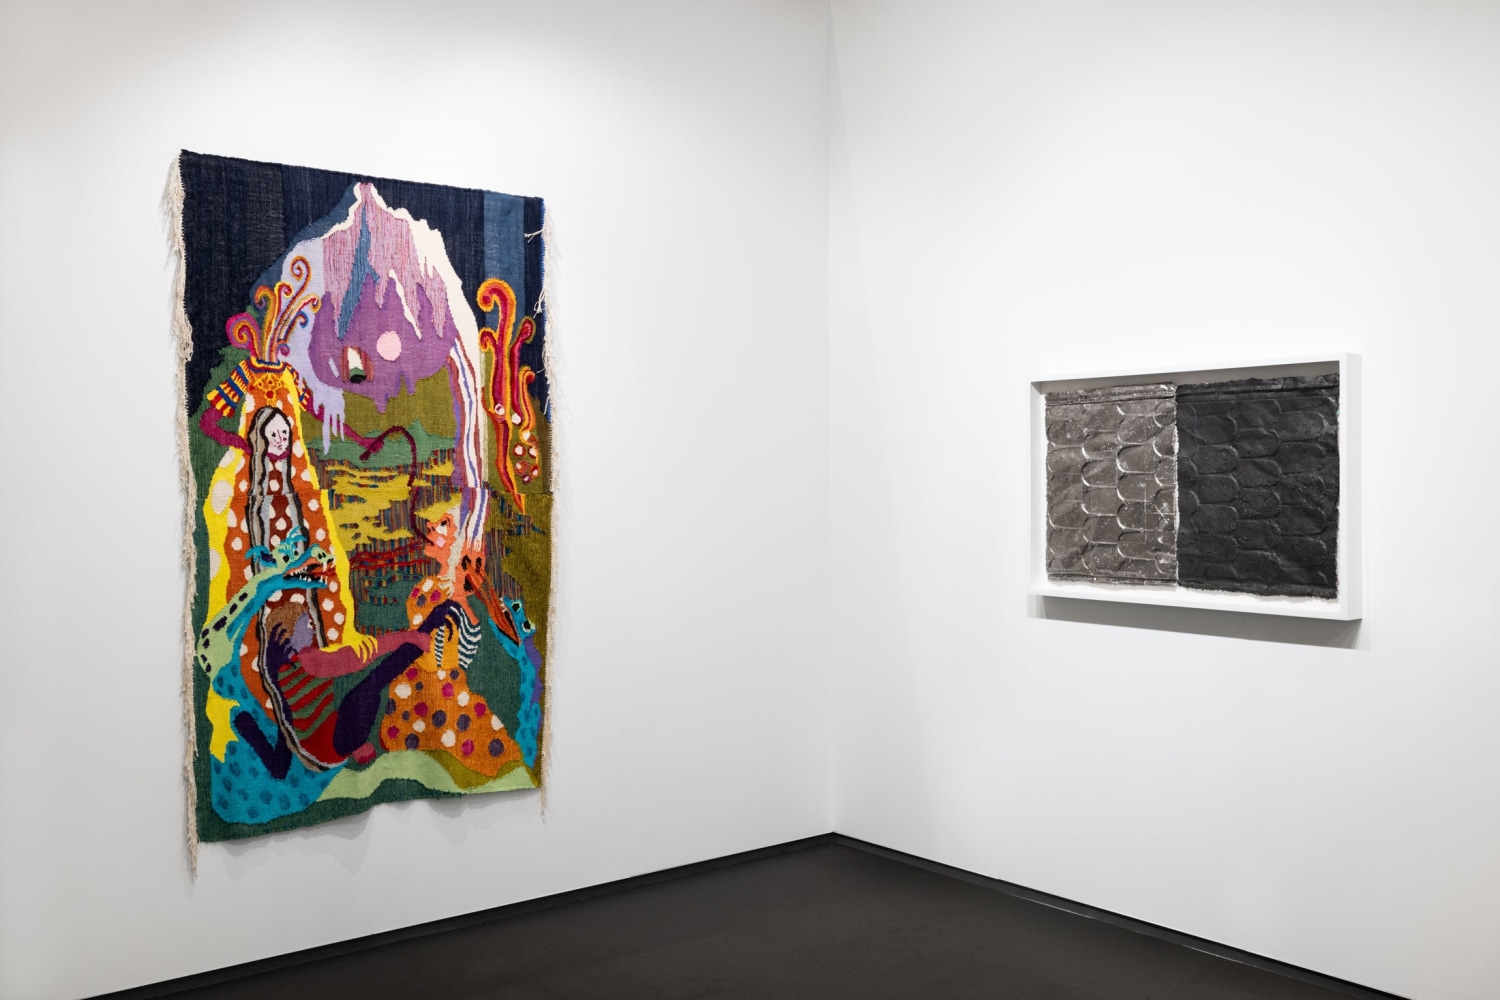 Luhring Augustine
Frieze Seoul 2022,&amp;nbsp;Booth C3
Installation view
Photo: Andrea Rossetti&amp;nbsp;